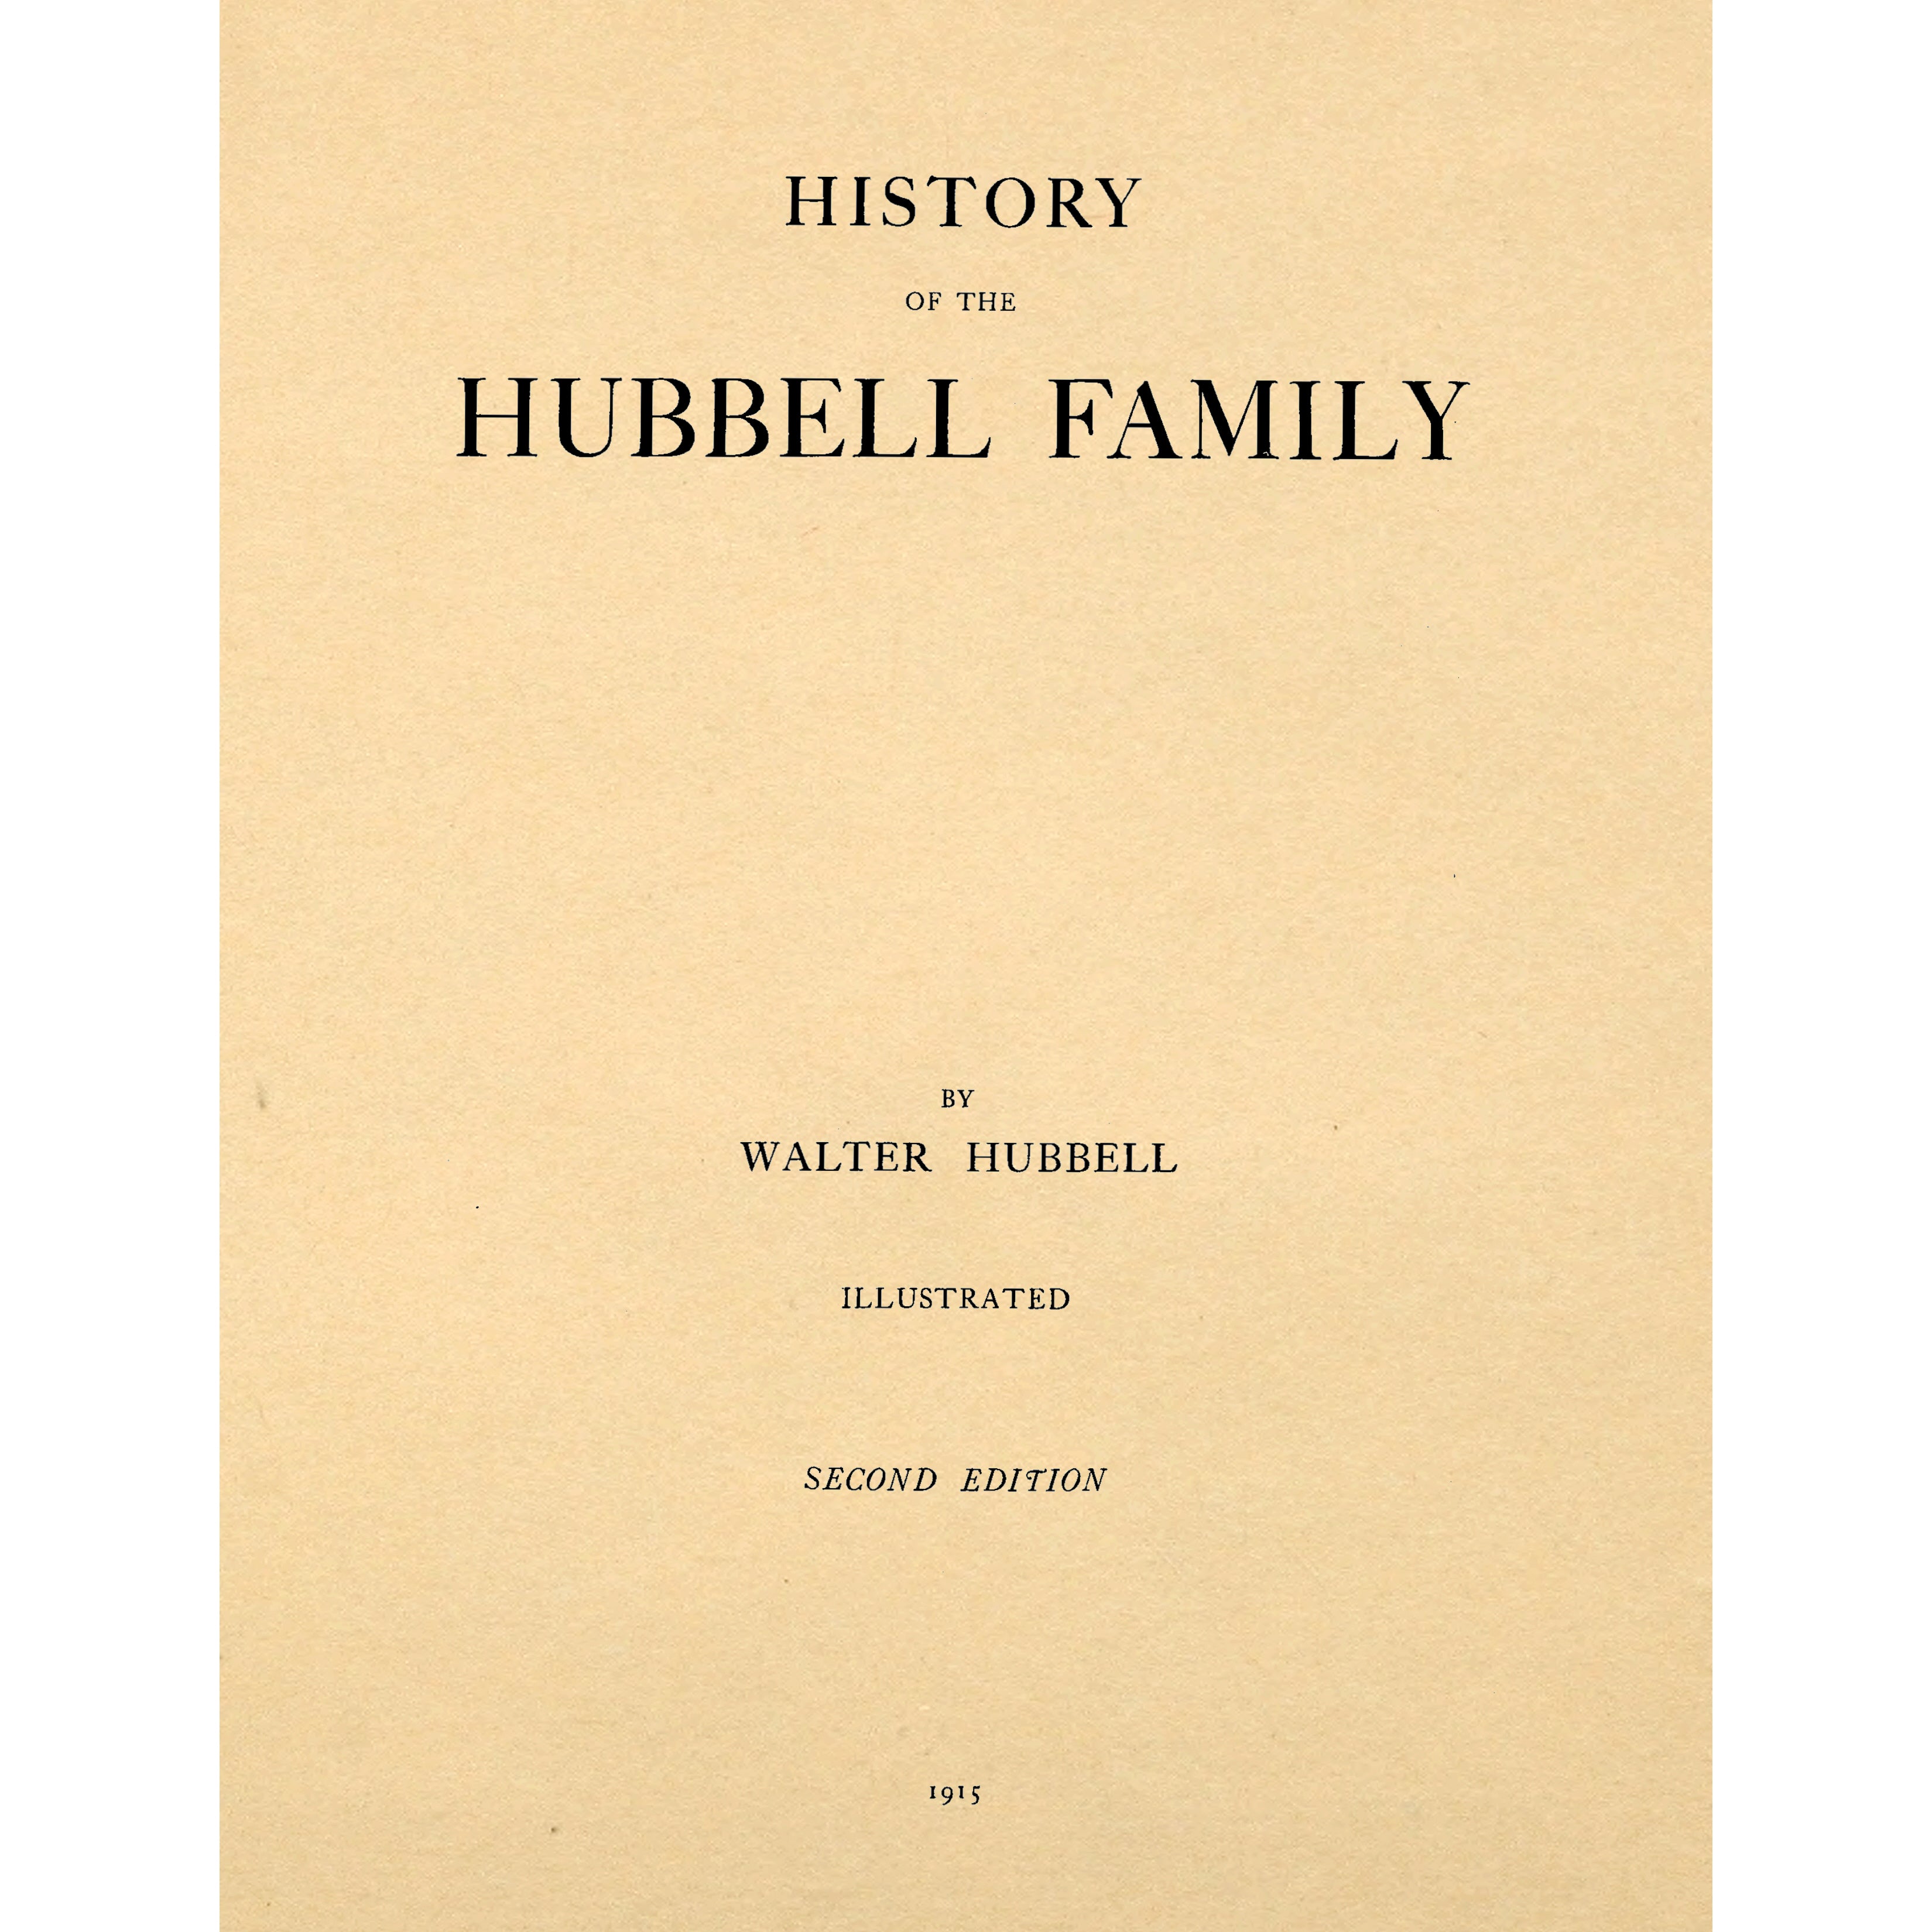 History of the Hubbell family